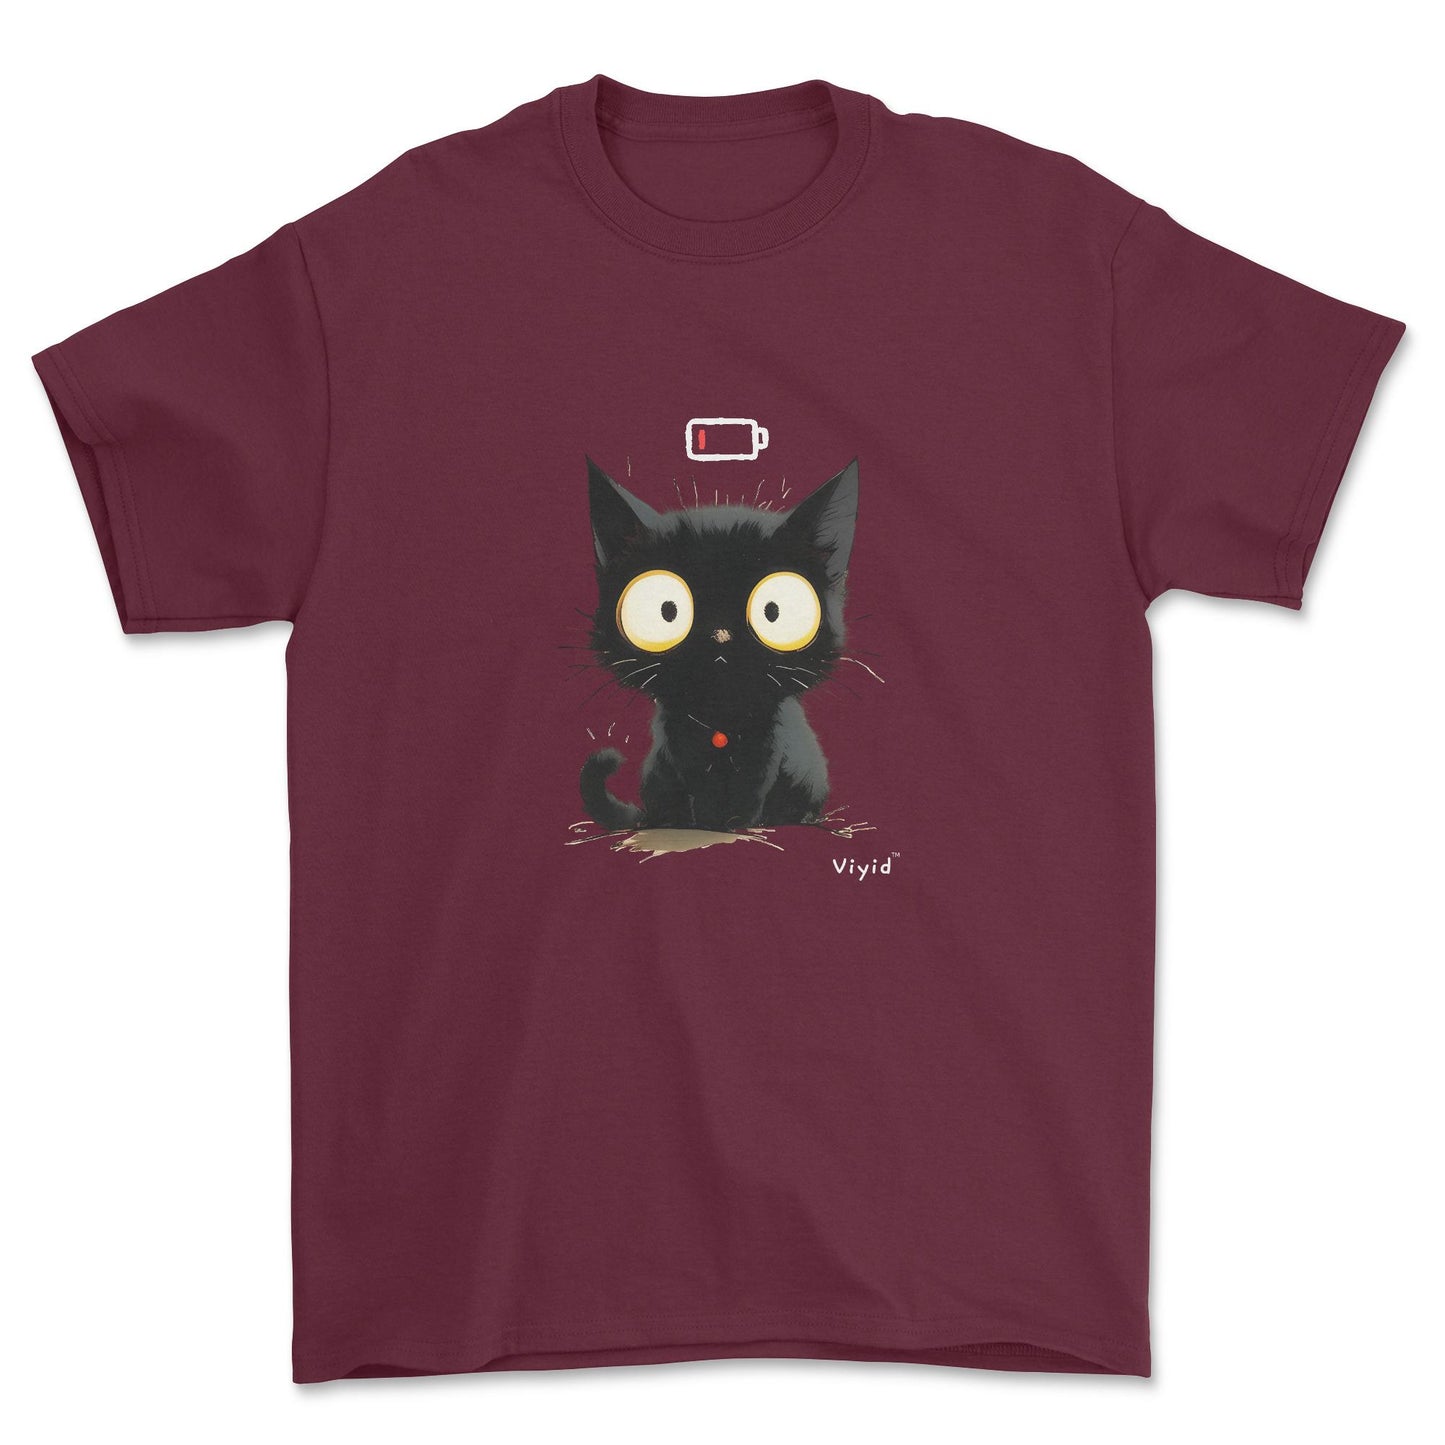 Low battery black cat youth t-shirt maroon